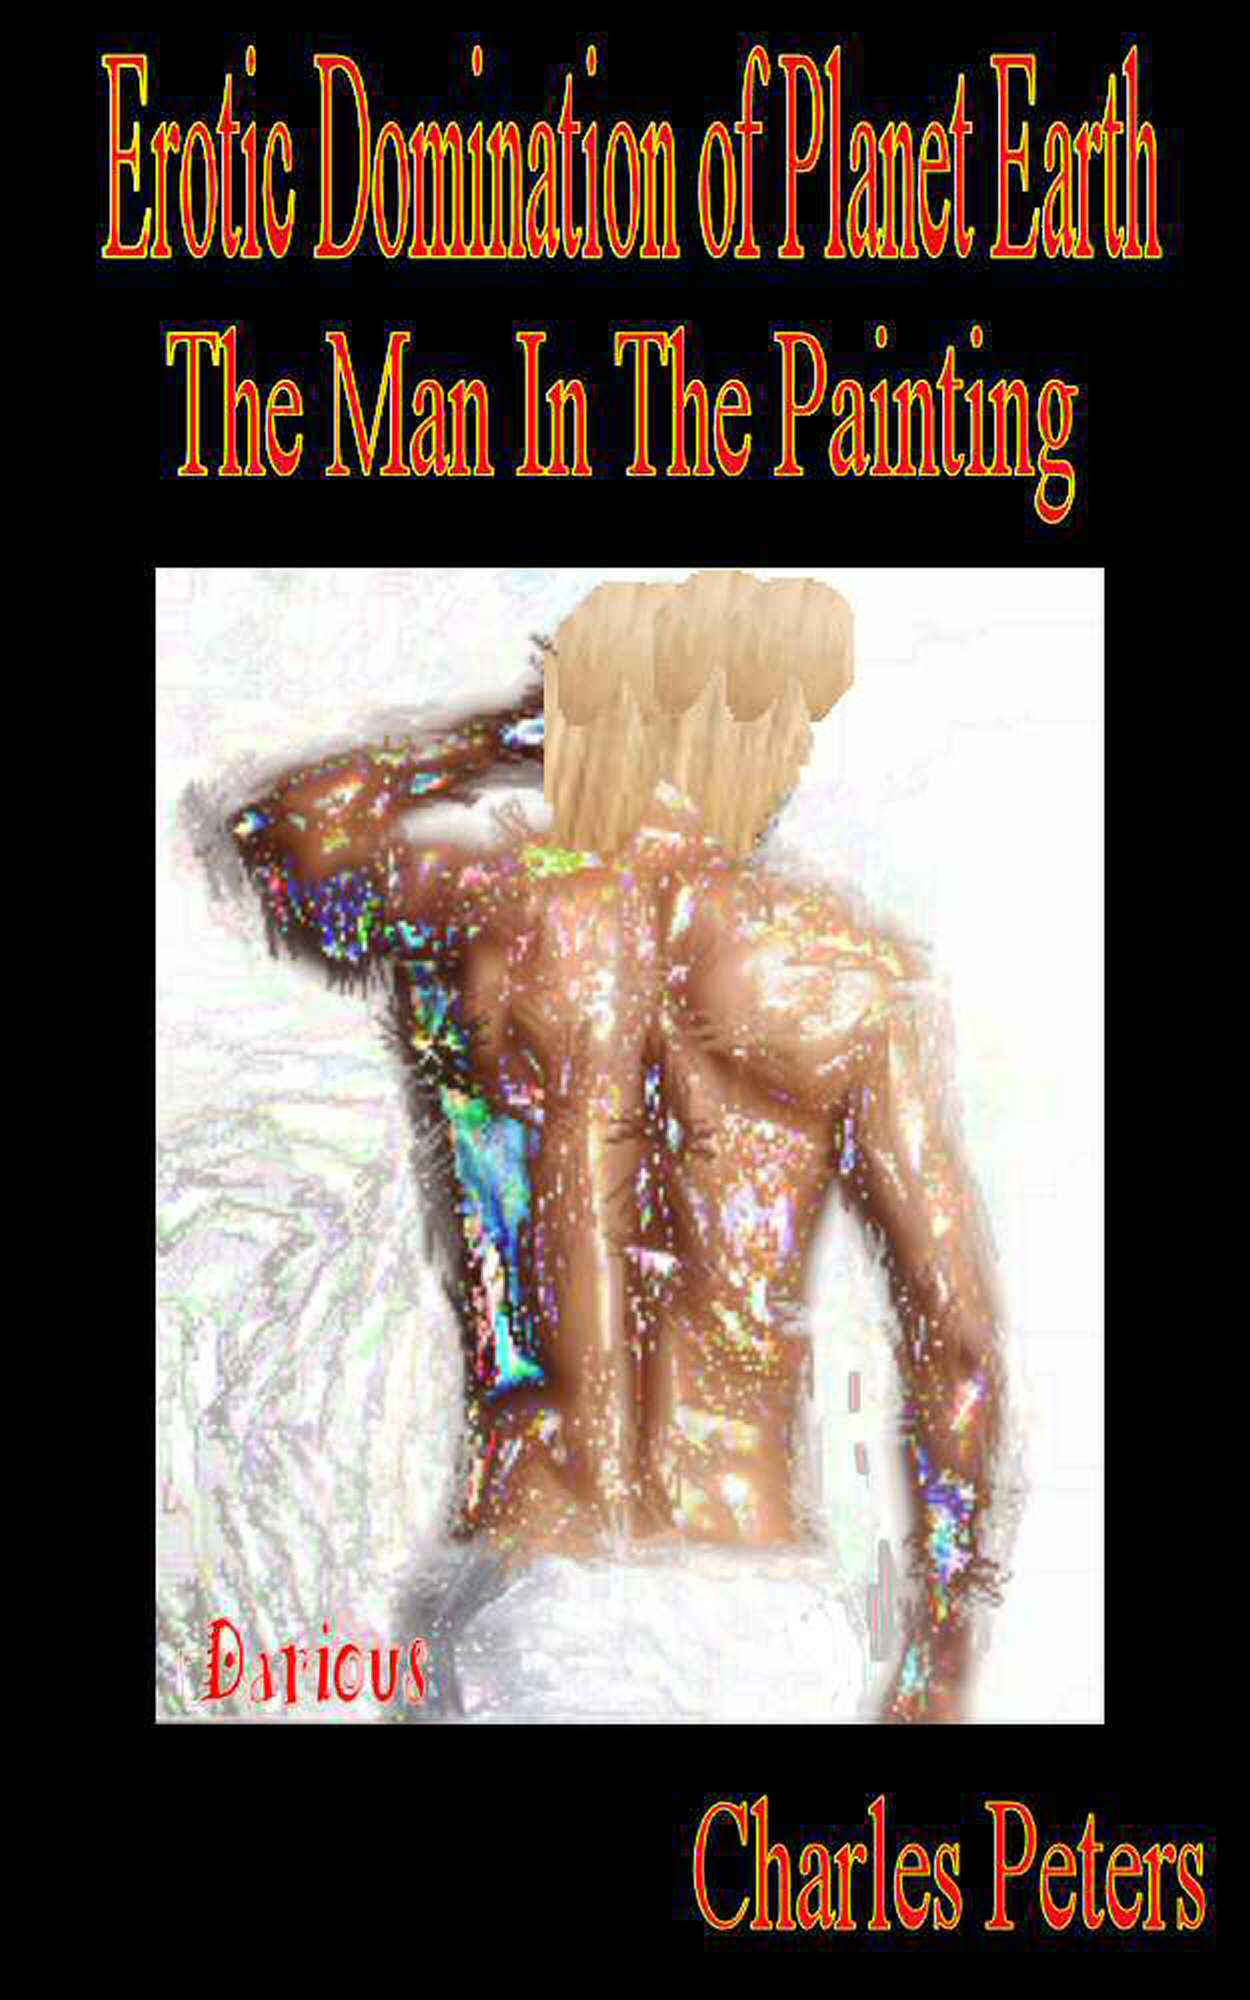 Story: The Man In Painting